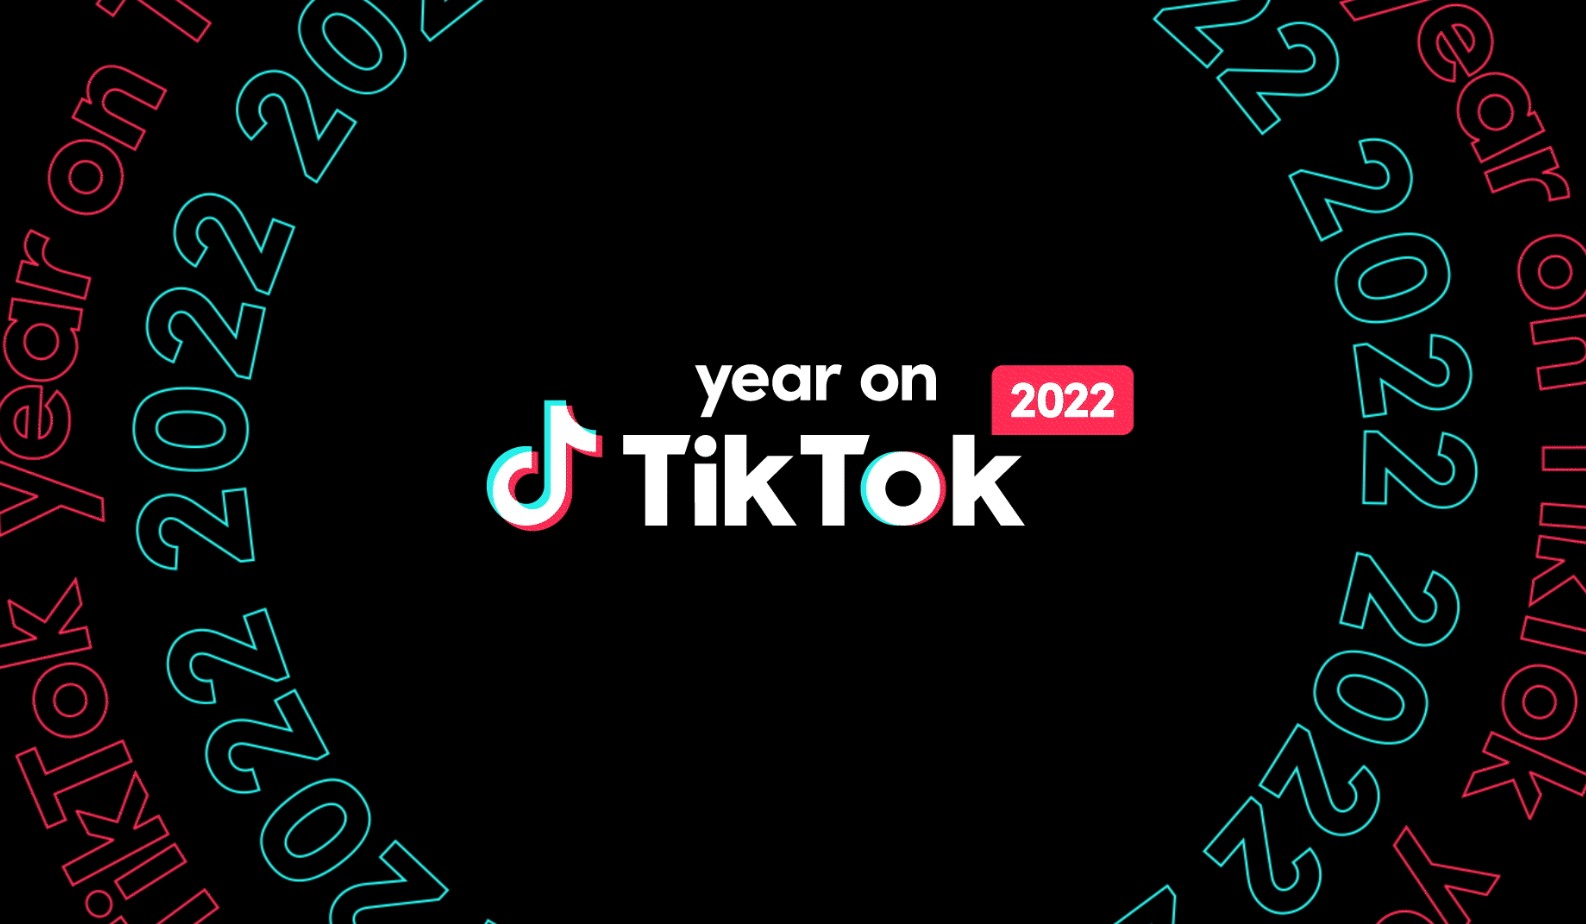 "year on TikTok 2022" with a central focus on the platform's logo, surrounded by neon-colored repetitions of the year 2022